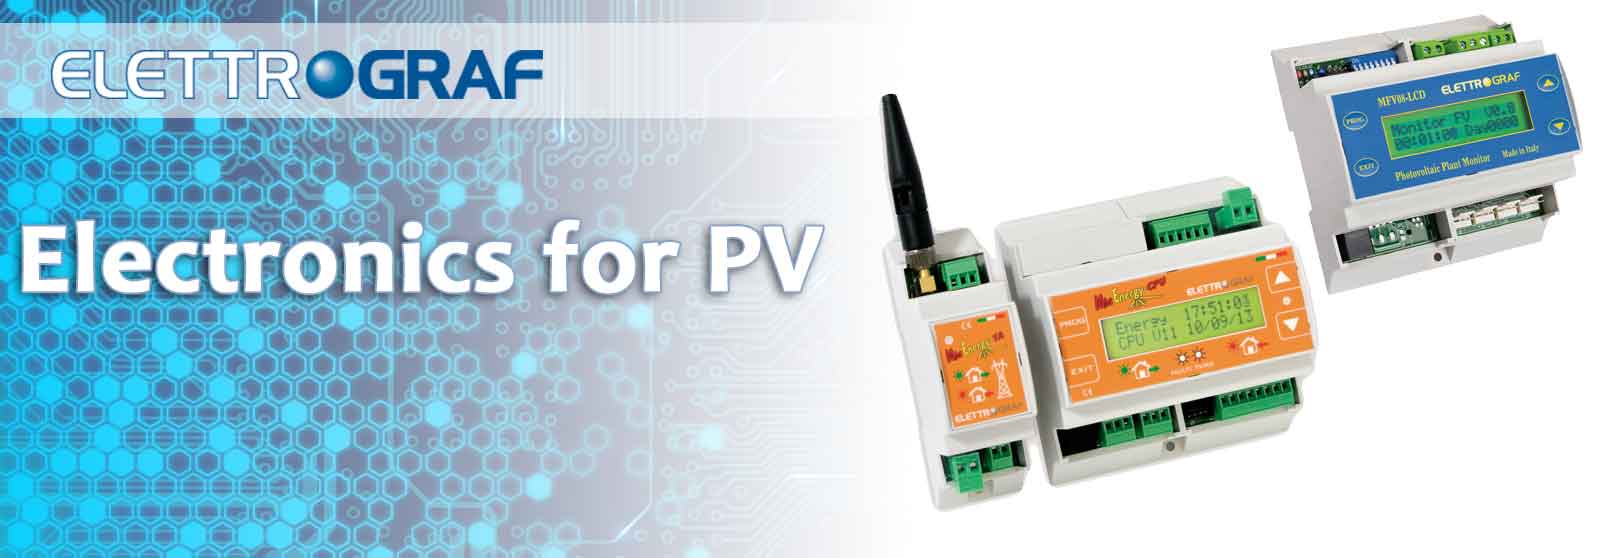 ELECTRONICS FOR PV